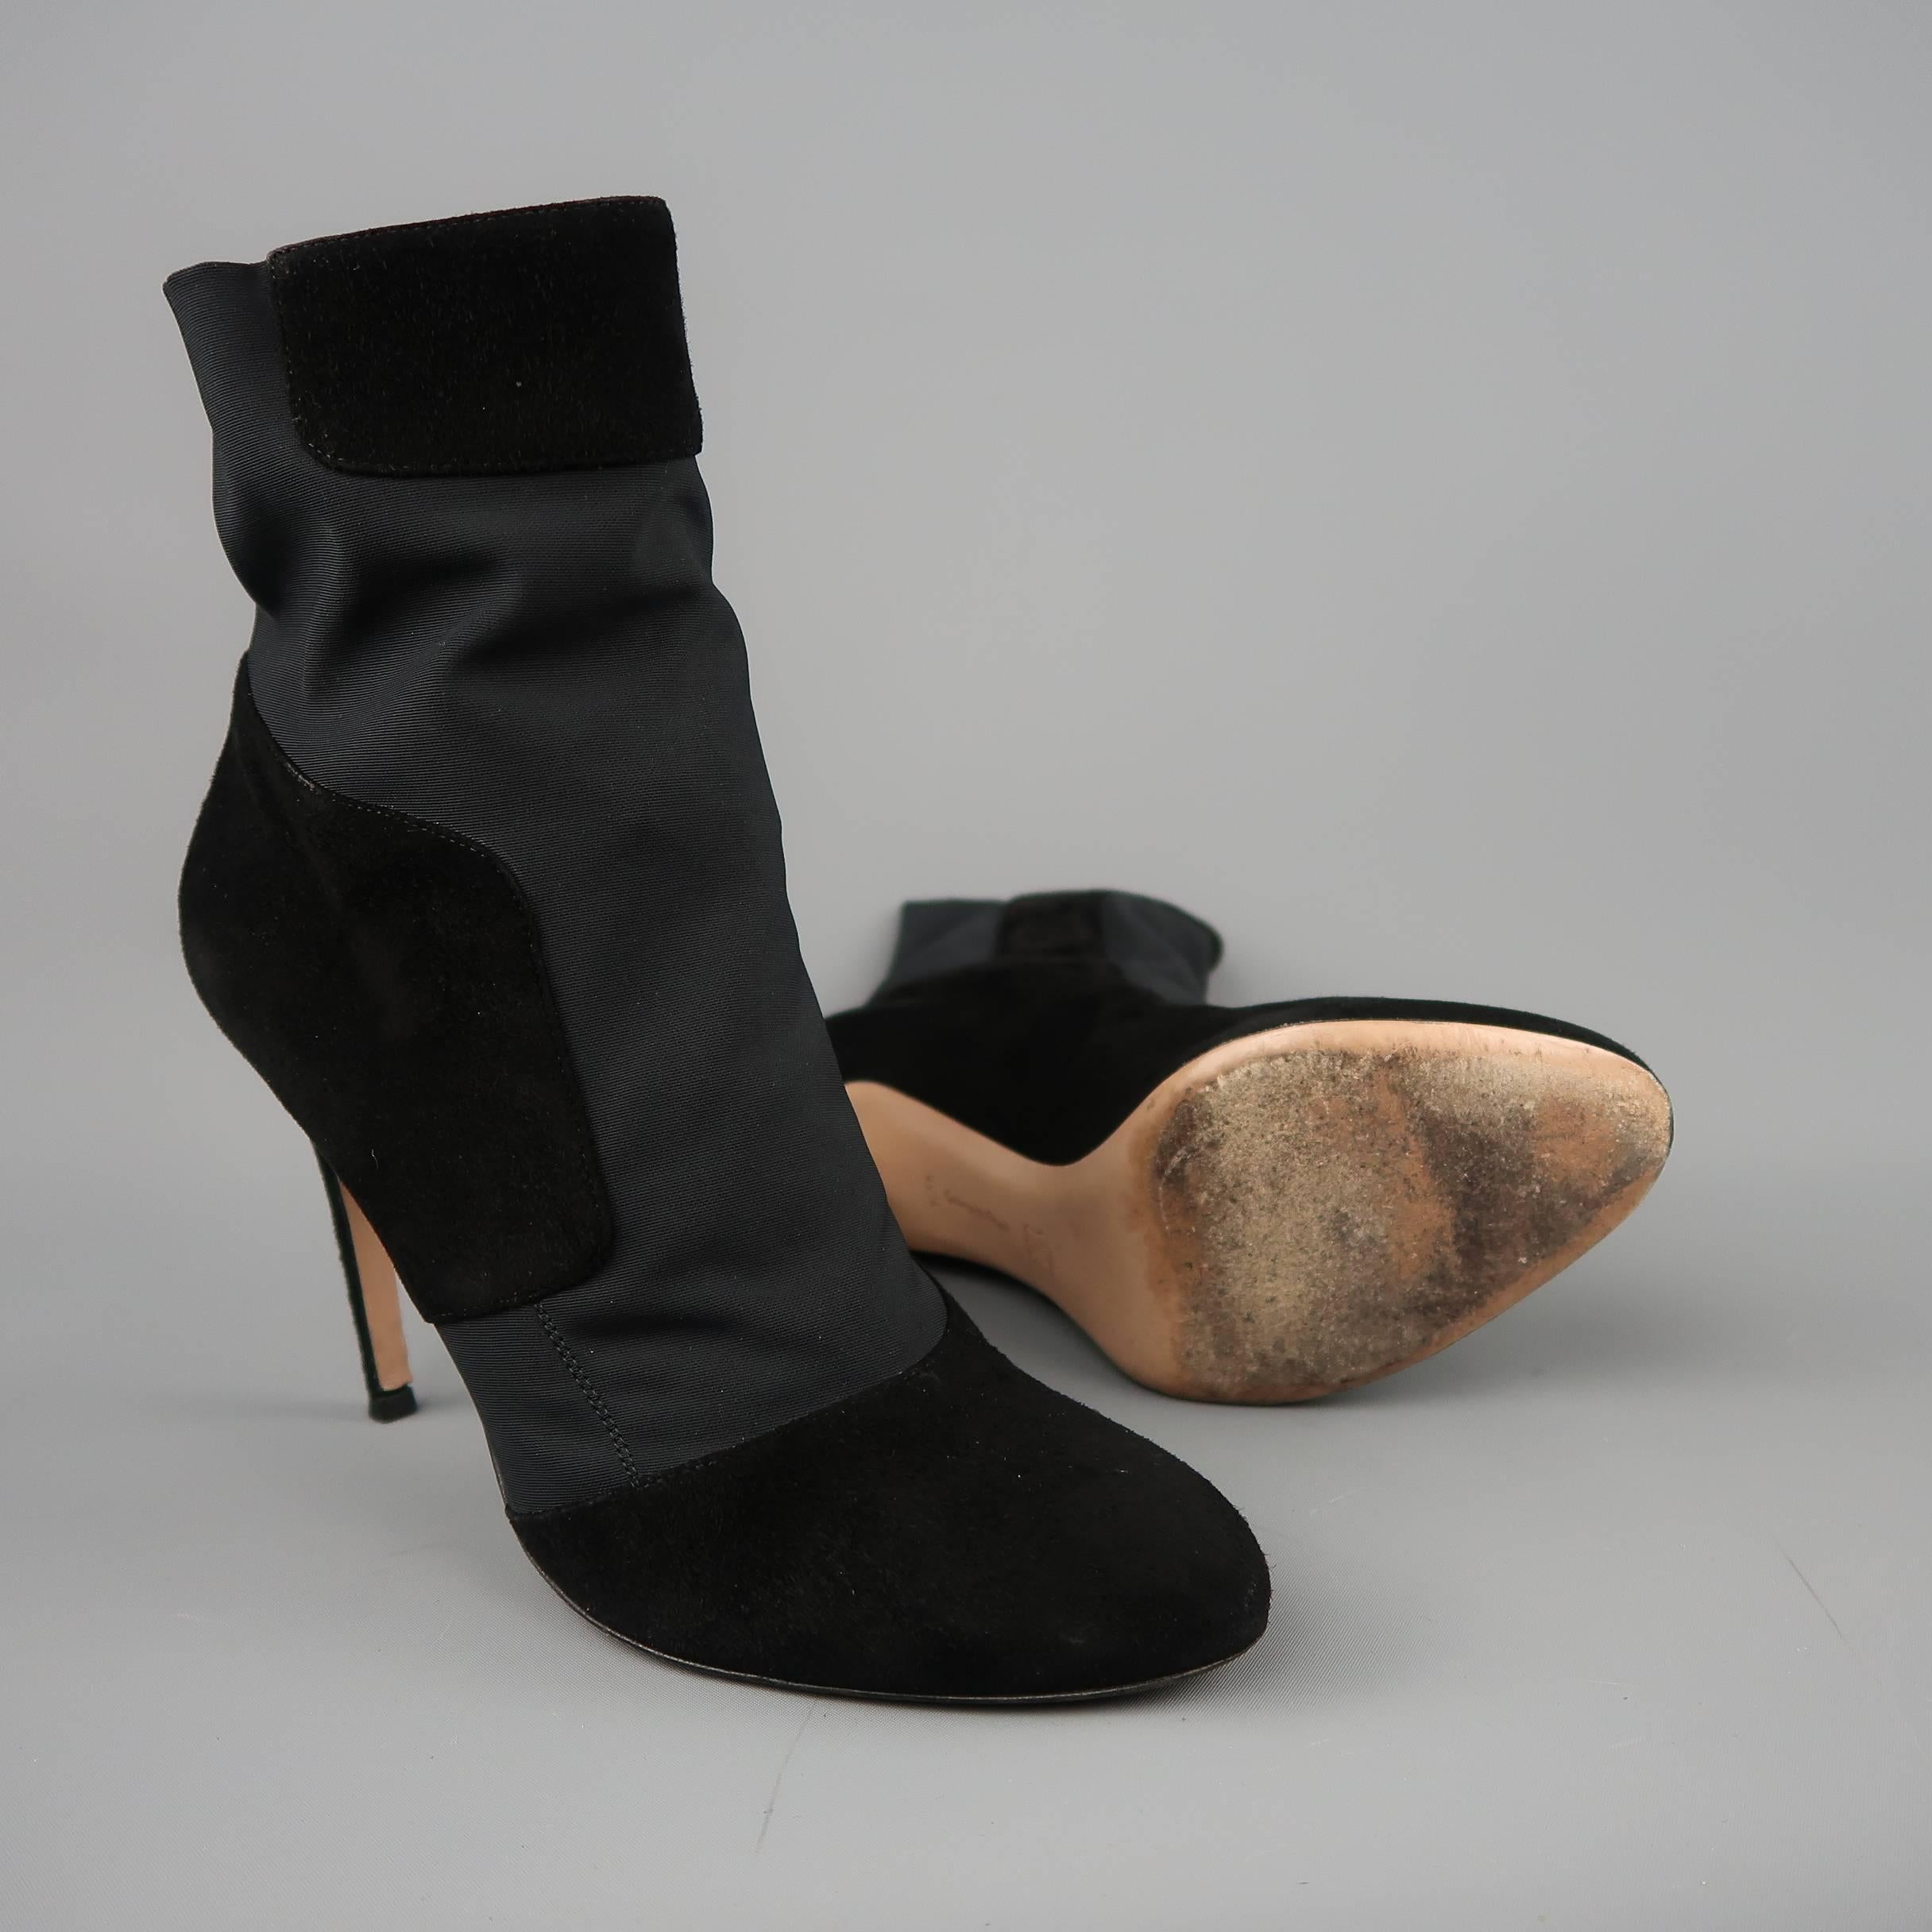 GIANVITO ROSSI ankle booties come in black suede with stretch panels, a rounded point toe, and covered stiletto heel. Made in Italy.
 
Good Pre-Owned Condition.
Marked: IT 40.5
 
Measurements:
 
Heel: 4.25 in